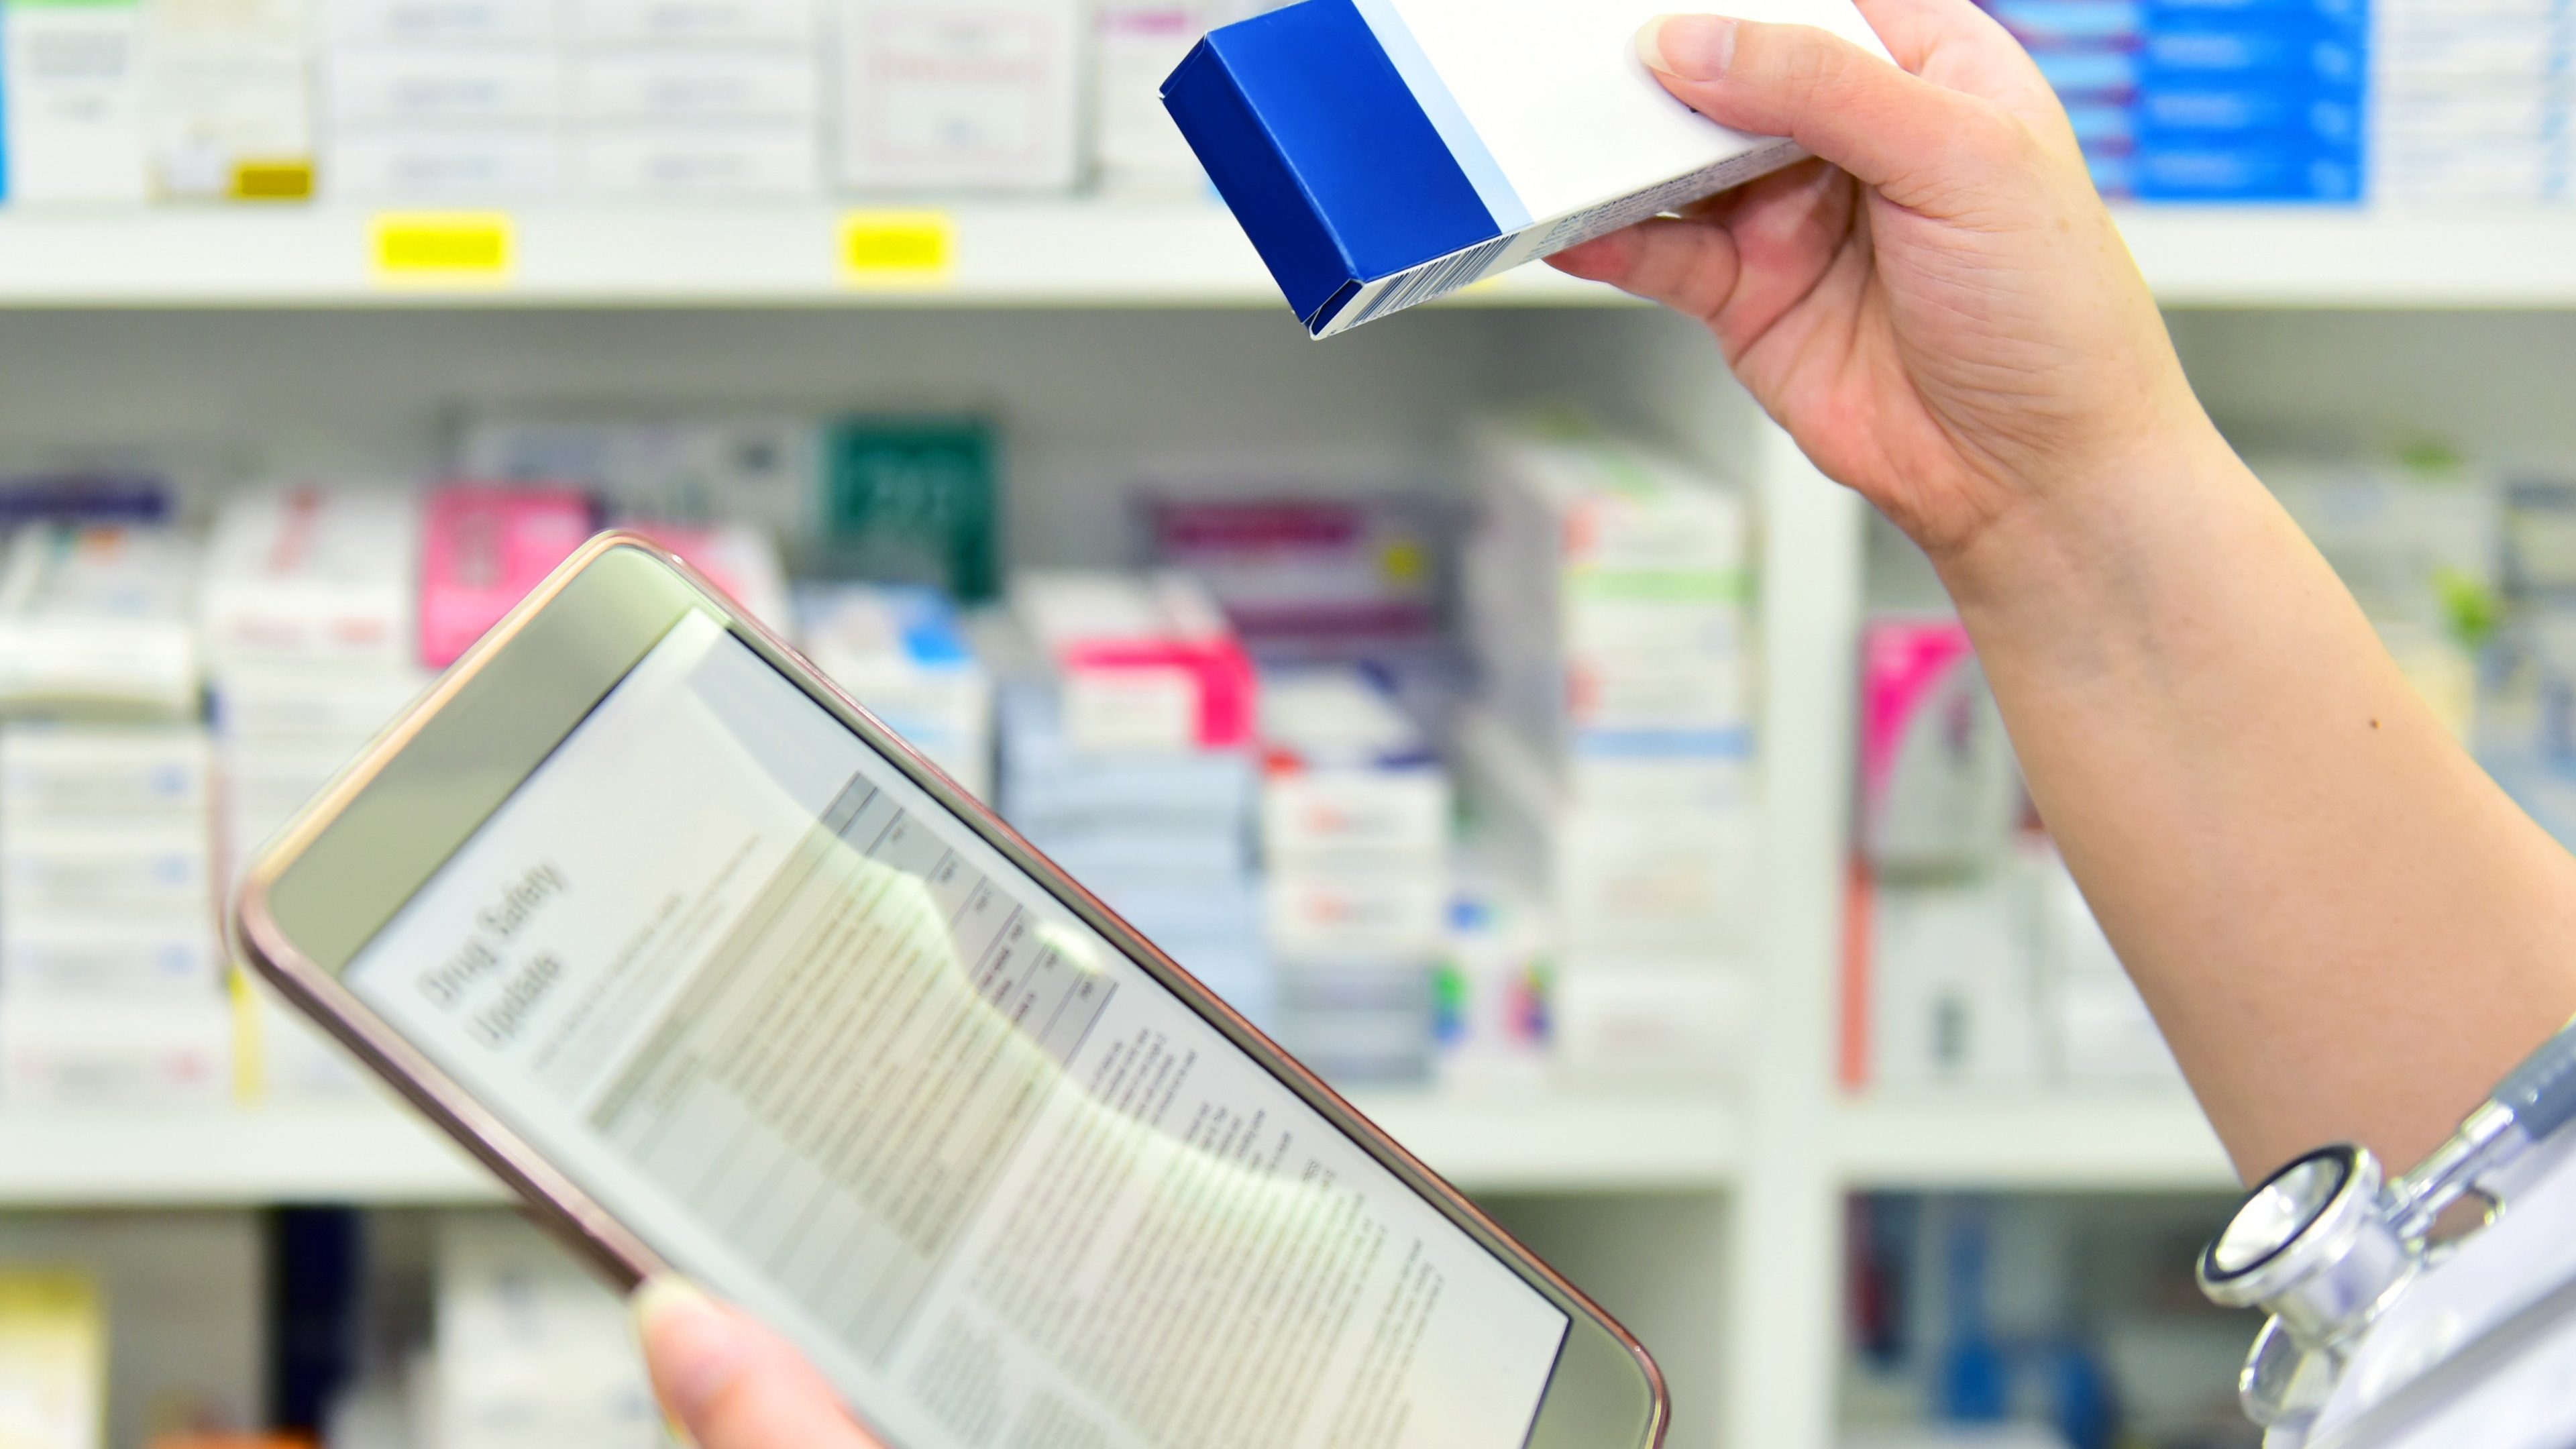 Doctor holding medicine box and computer tablet for filling prescription in pharmacy drugstore.